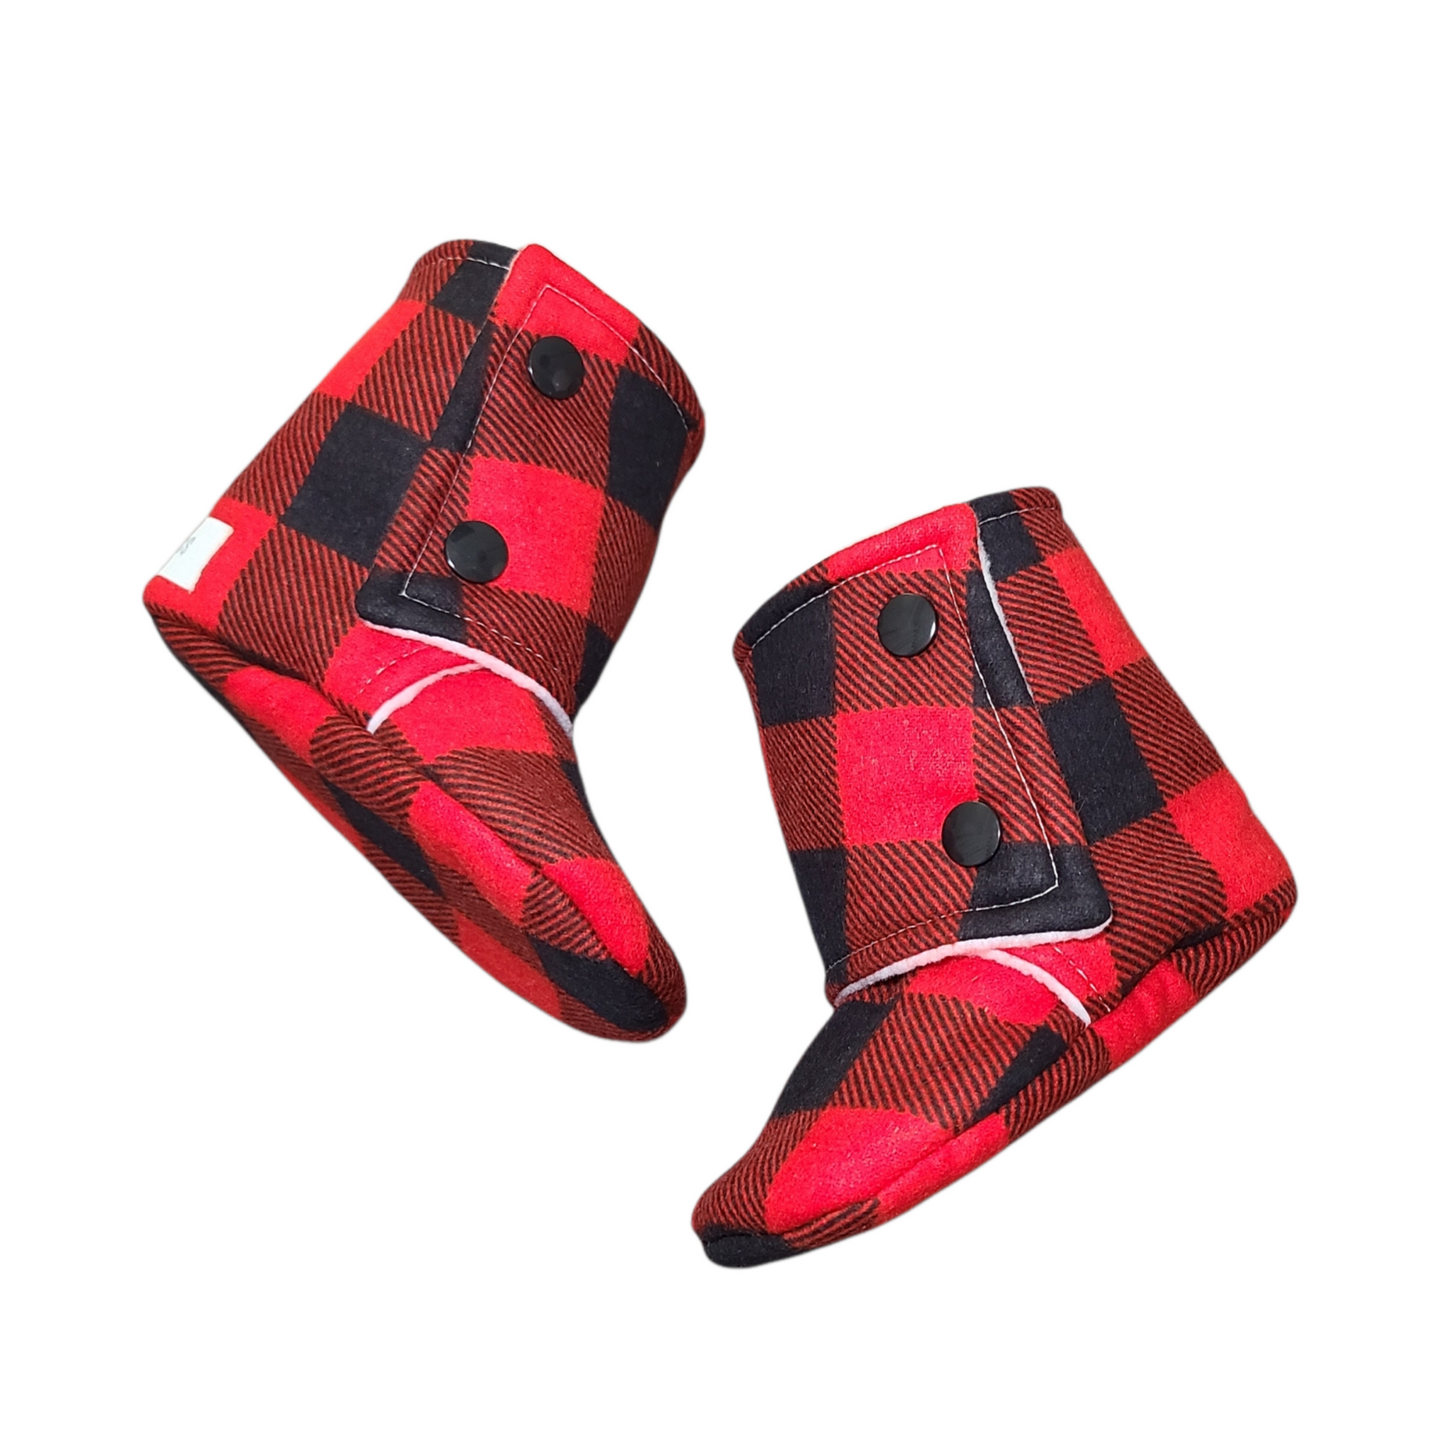 Red BUFFALO Plaid Baby Booties, Baby Gift, baby Moccs, Baby Booties, Buffalo Plaid Baby Slippers, Crib Shoes, Buffalo Plaid Baby Shoes